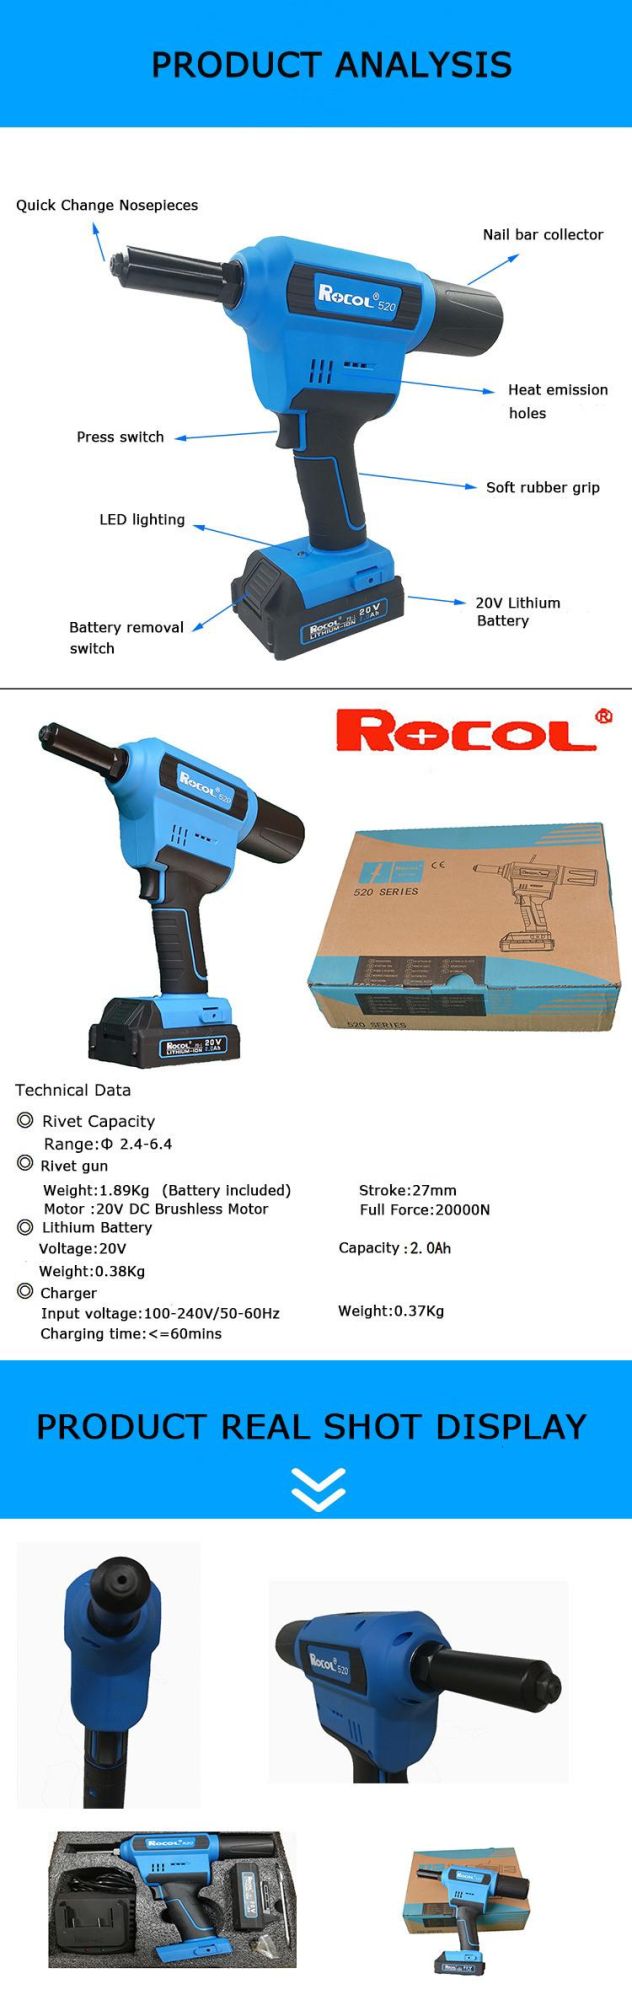 Light Portable Large Pull Force Quick Charge Durable Lithium Rivet Gun